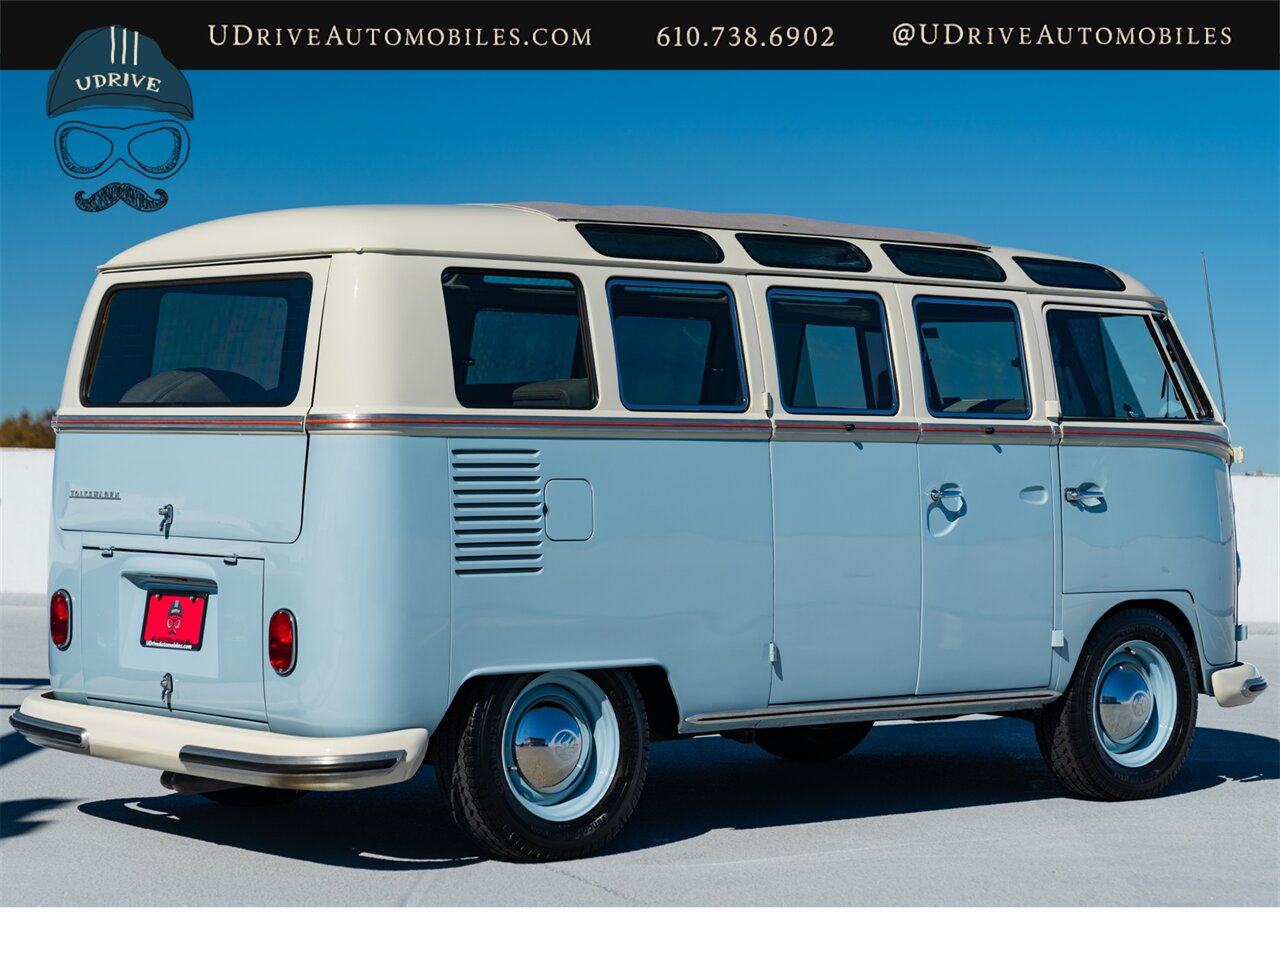 1965 Volkswagen Bus/Vanagon 21 Window Deluxe Transporter  Built By East Coast VW Restorations 1914cc A/C - Photo 21 - West Chester, PA 19382